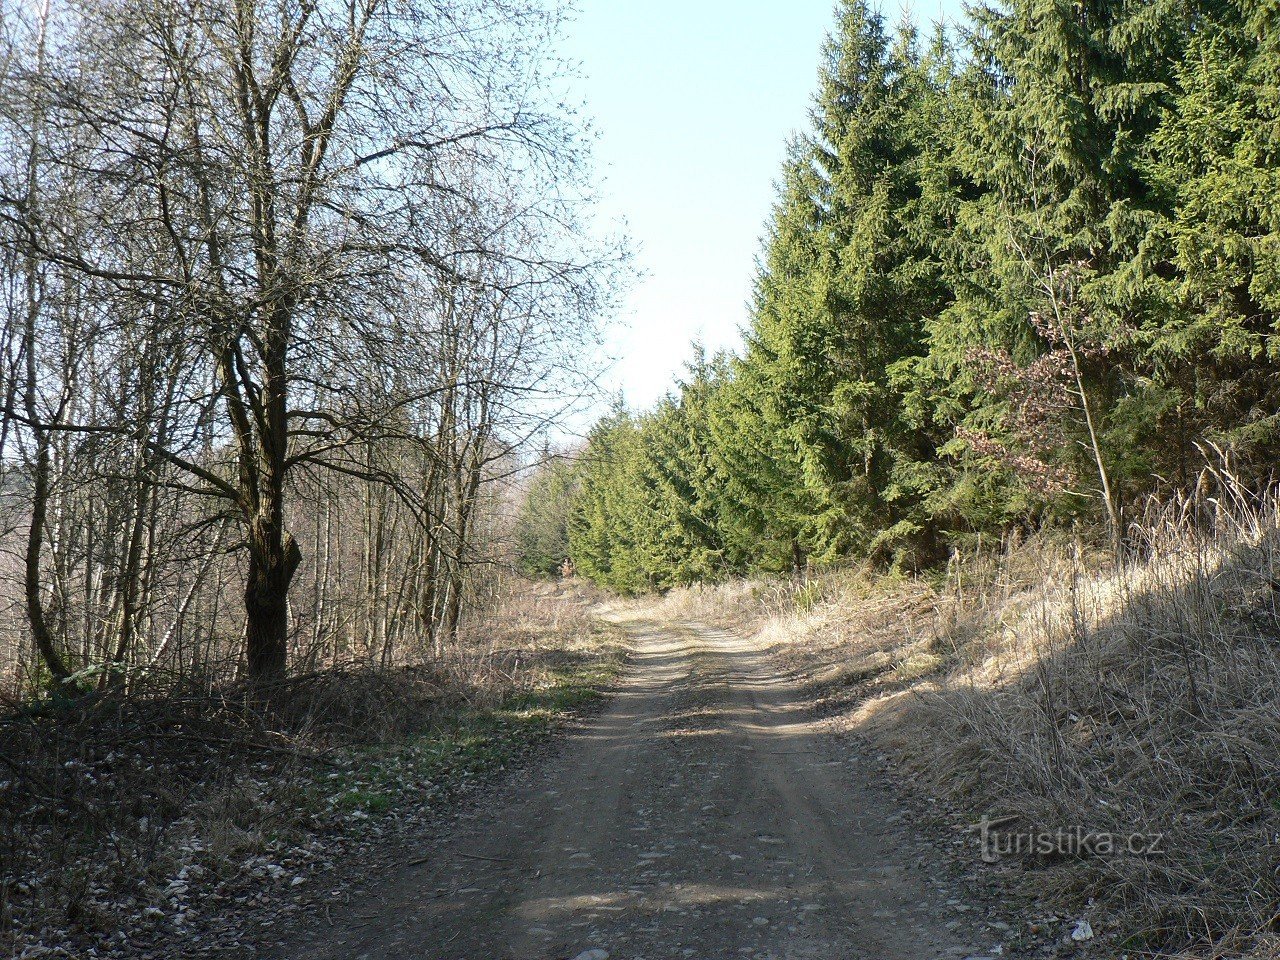 Bítovy, the path along the eastern slope